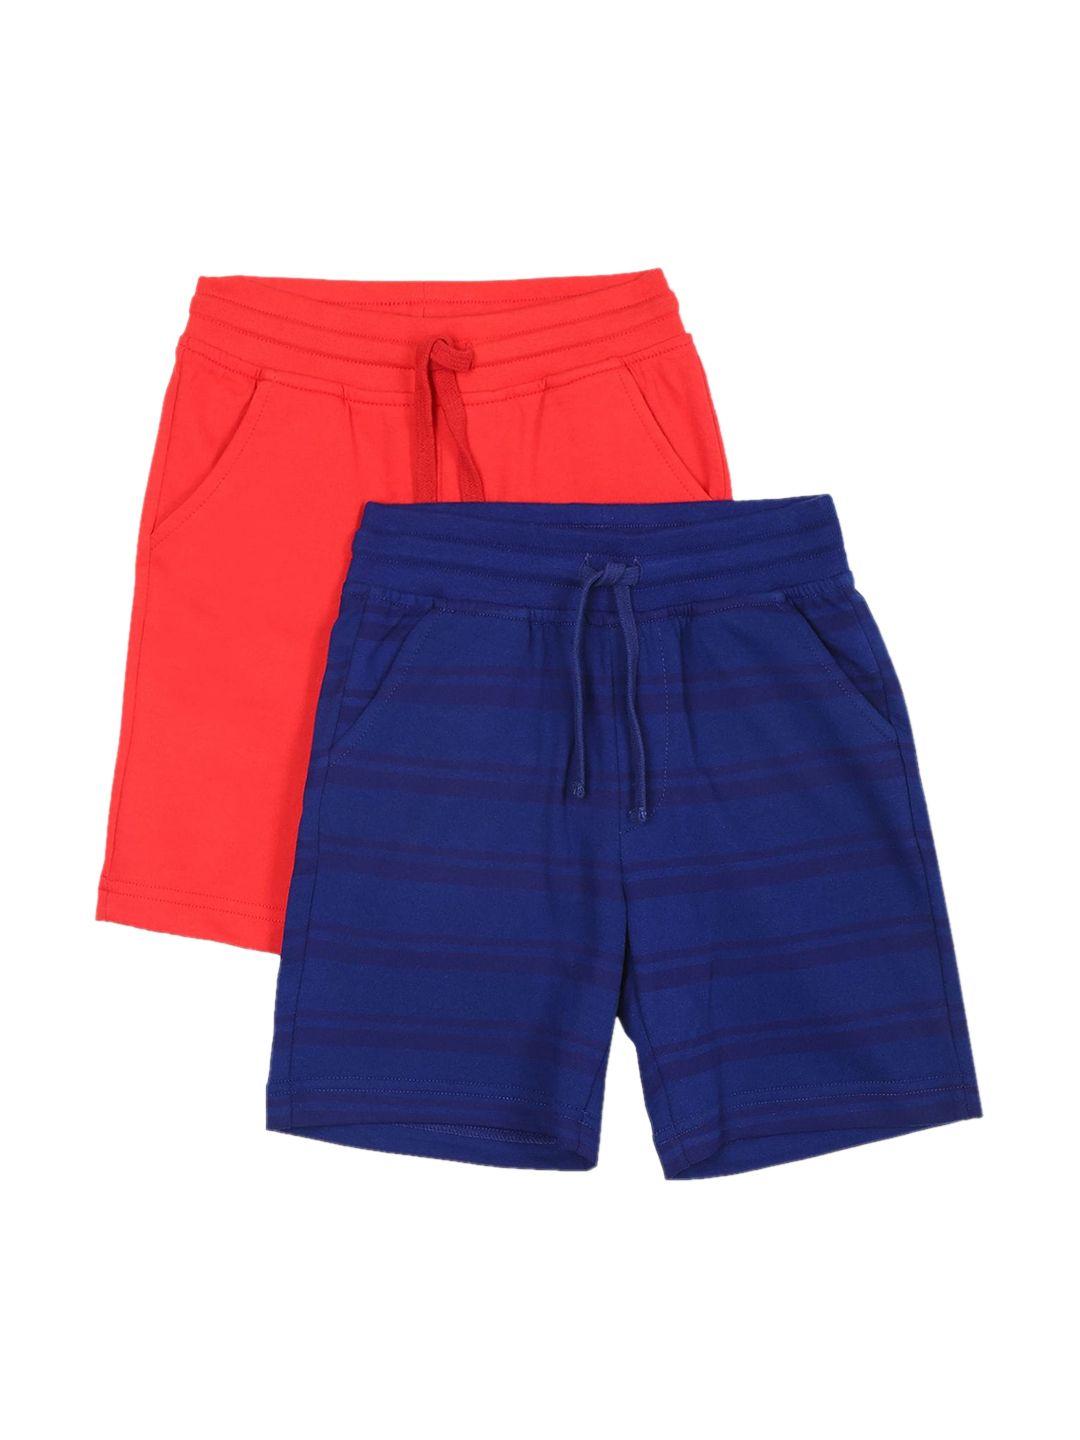 cherokee boys assorted pack of 2 pure cotton shorts